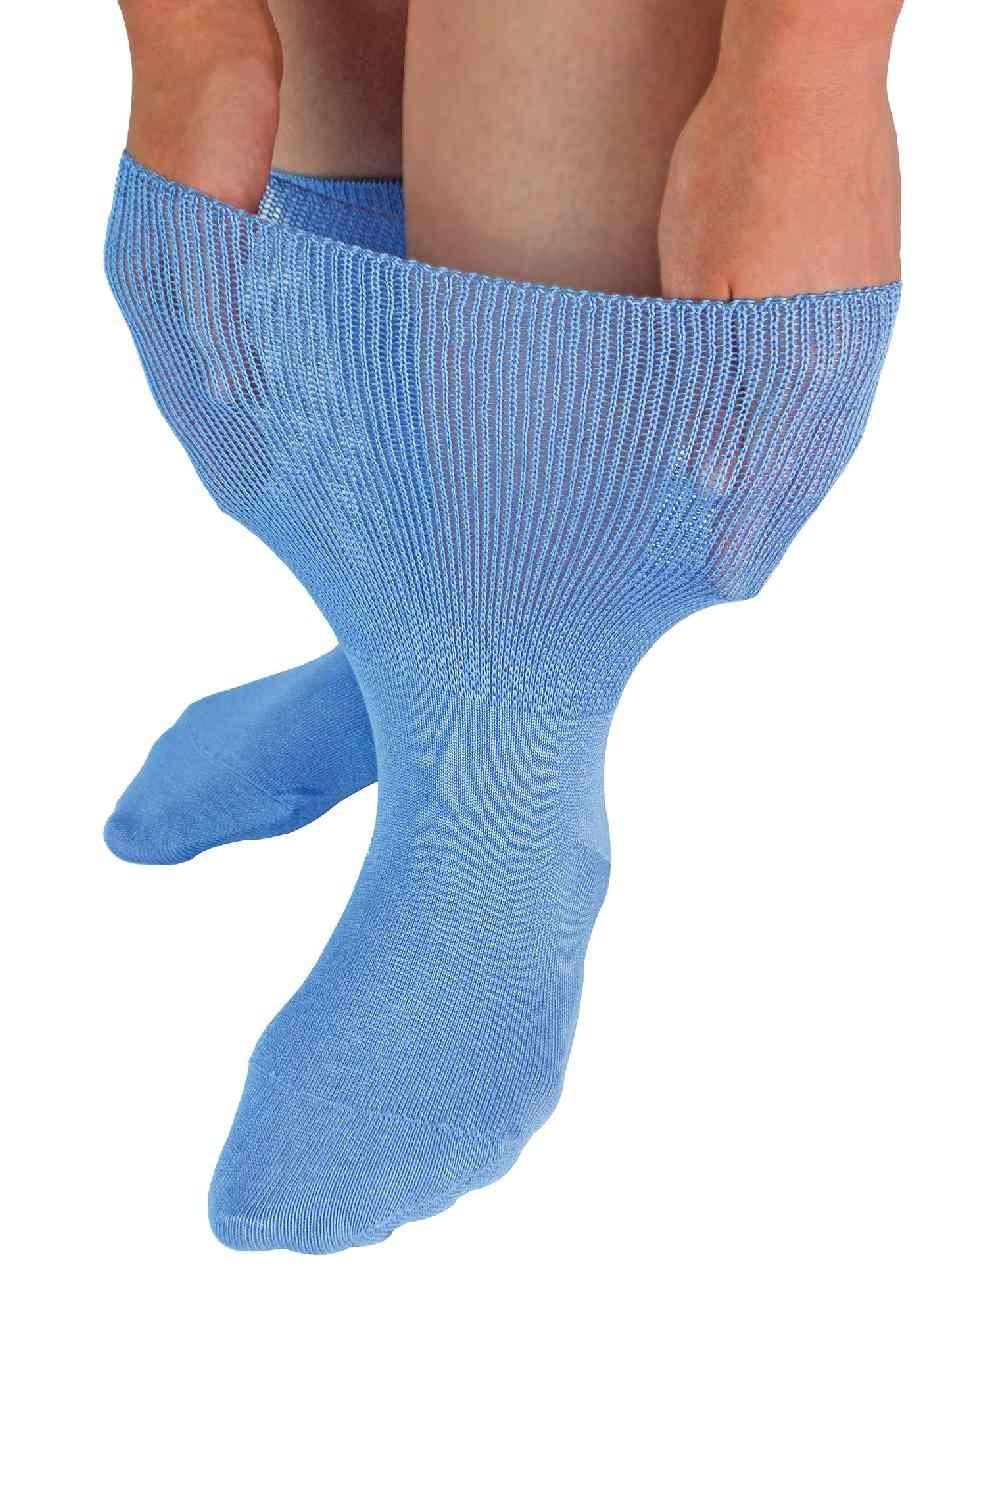 Extra Wide Bamboo Oedema Diabetic Socks for Swollen Feet & Ankles